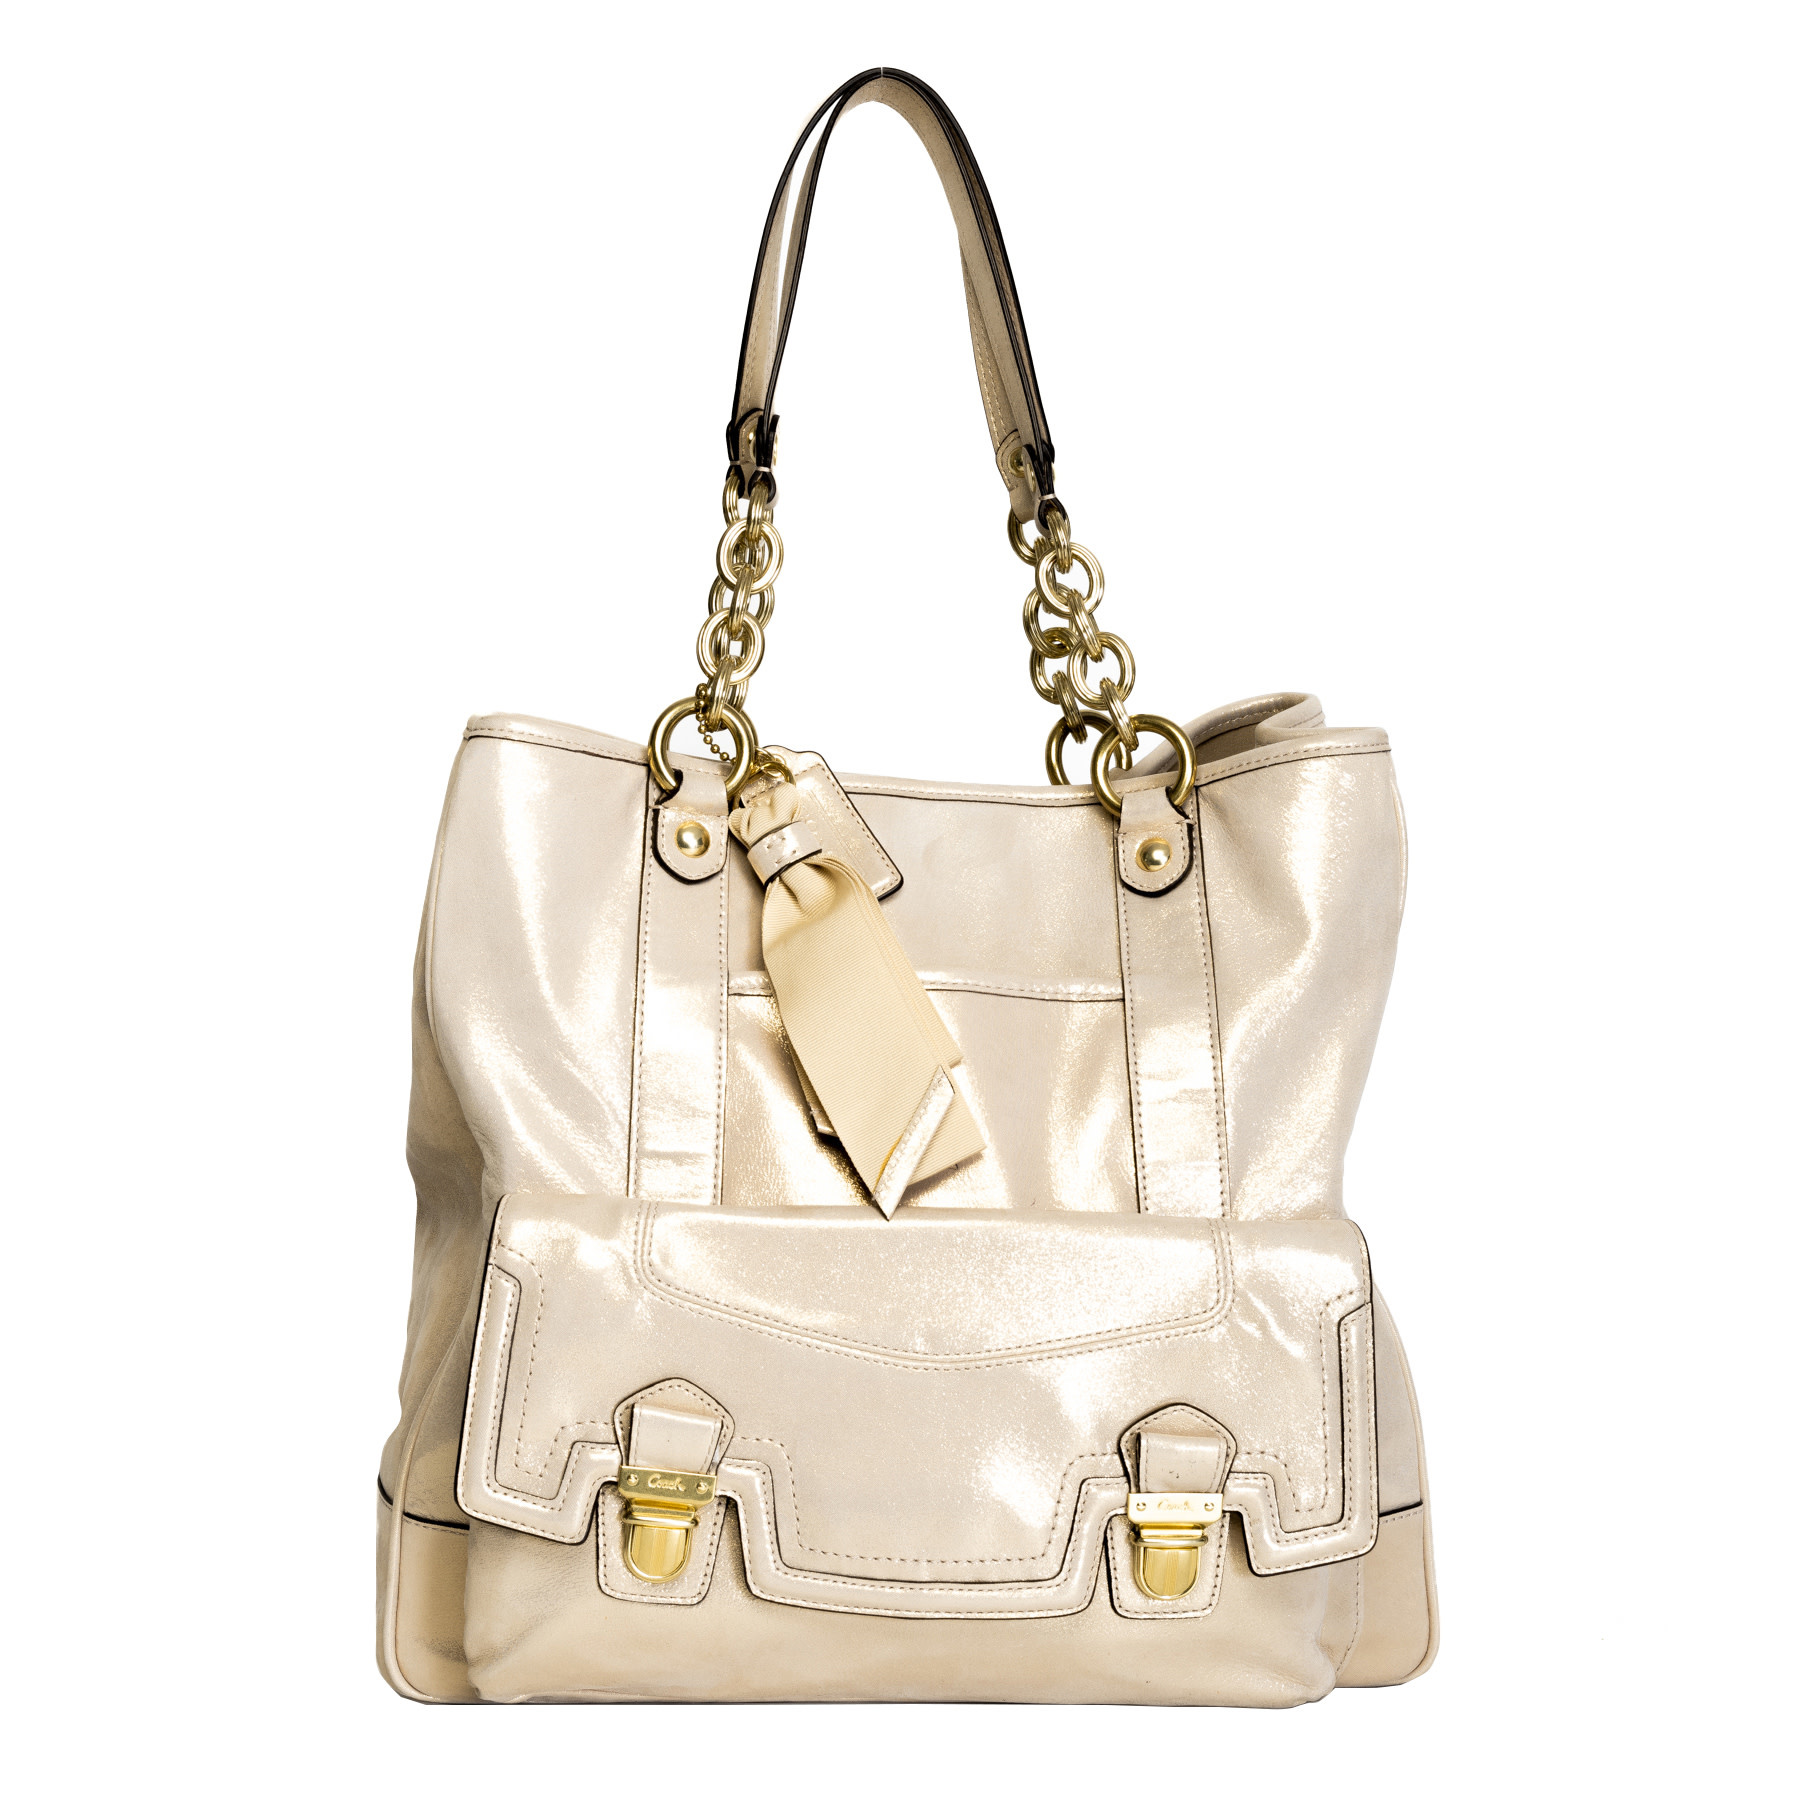 COACH GOLD TEXTURED LEATHER FASHION TOTE BAG - CRTBLNCHSHP